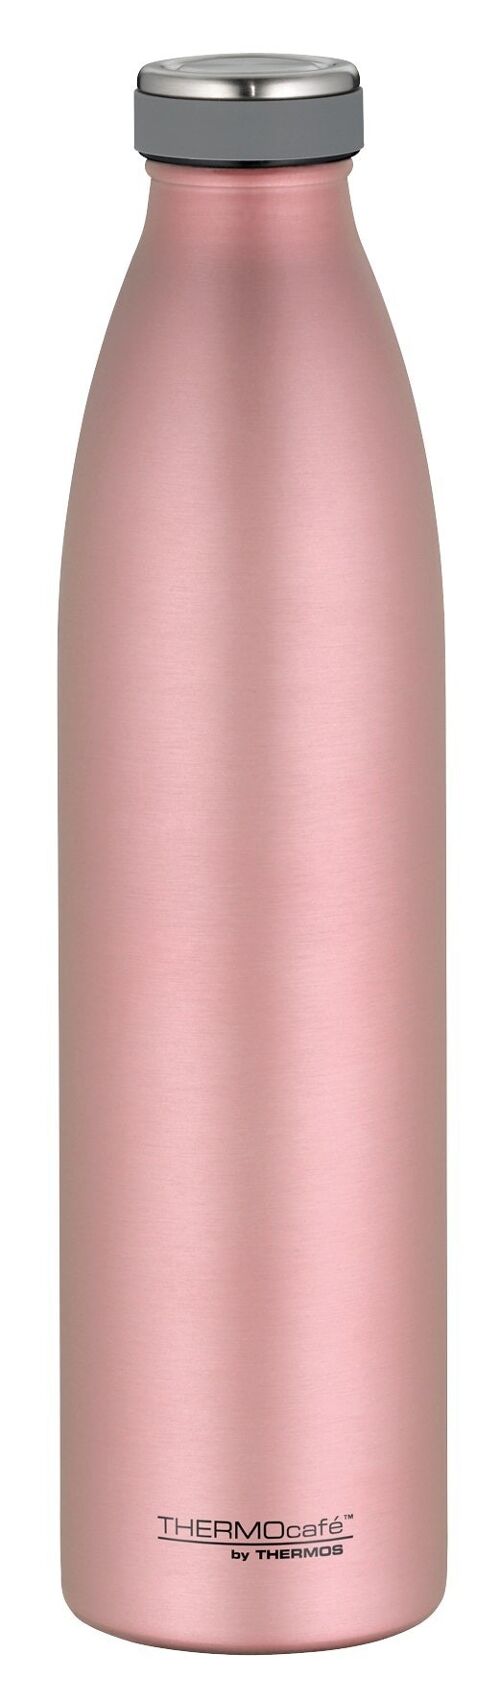 Isolier-Trinkflasche, TC BOTTLE 1,00 l, rose gold mat